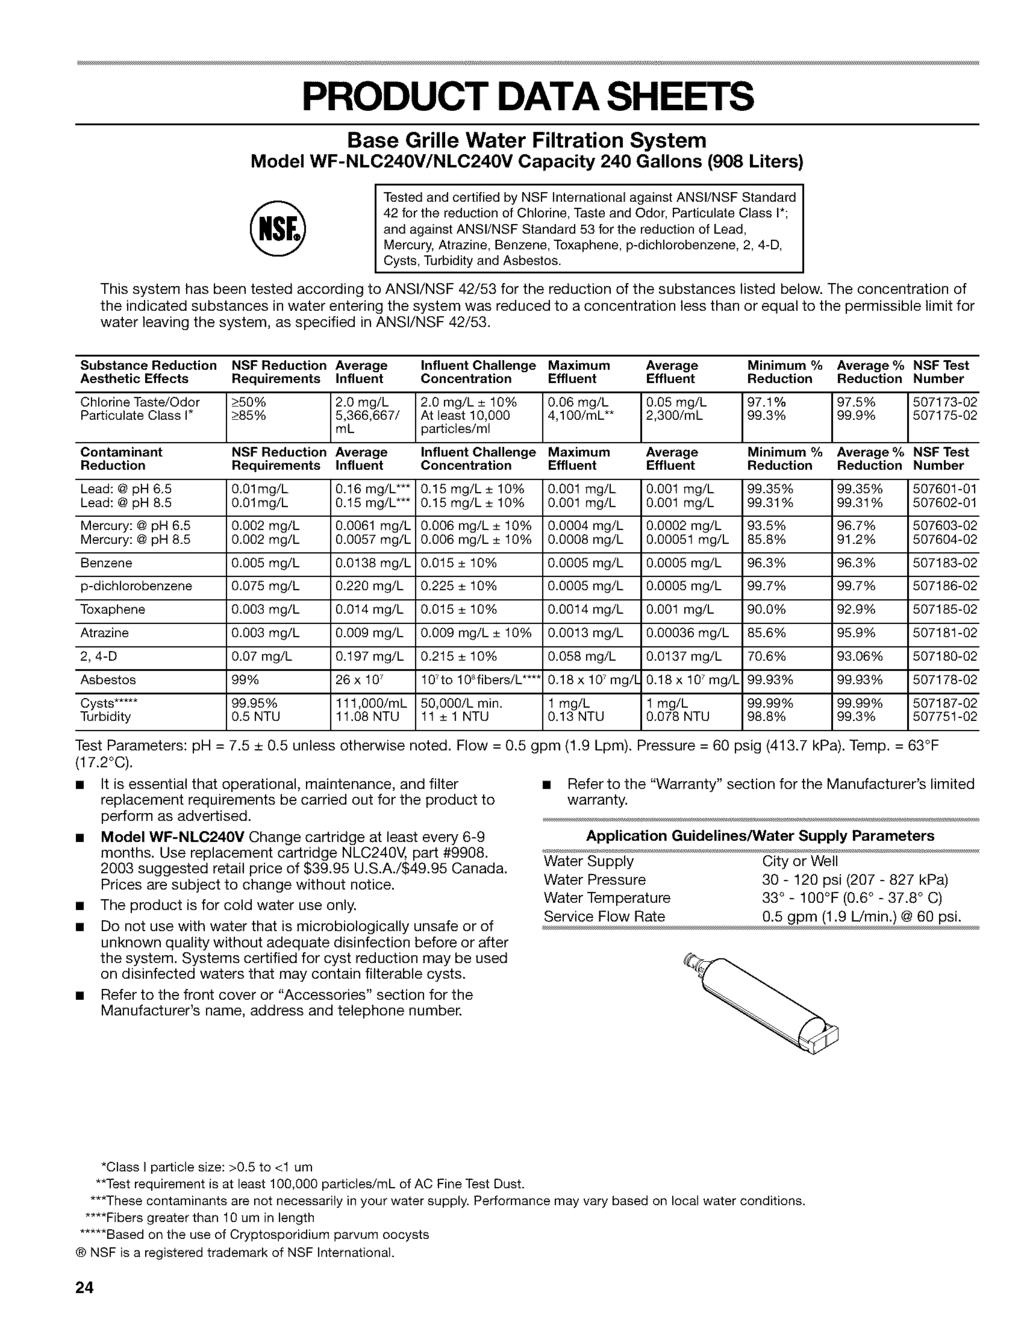 PRODUCT DATA SHEETS Base Grille Water Filtration System Model WF-NLC240V/NLC240V Capacity 240 Gallons (908 Liters) I Tested and certified by NSF International against ANSI/NSF Standard 42 for the